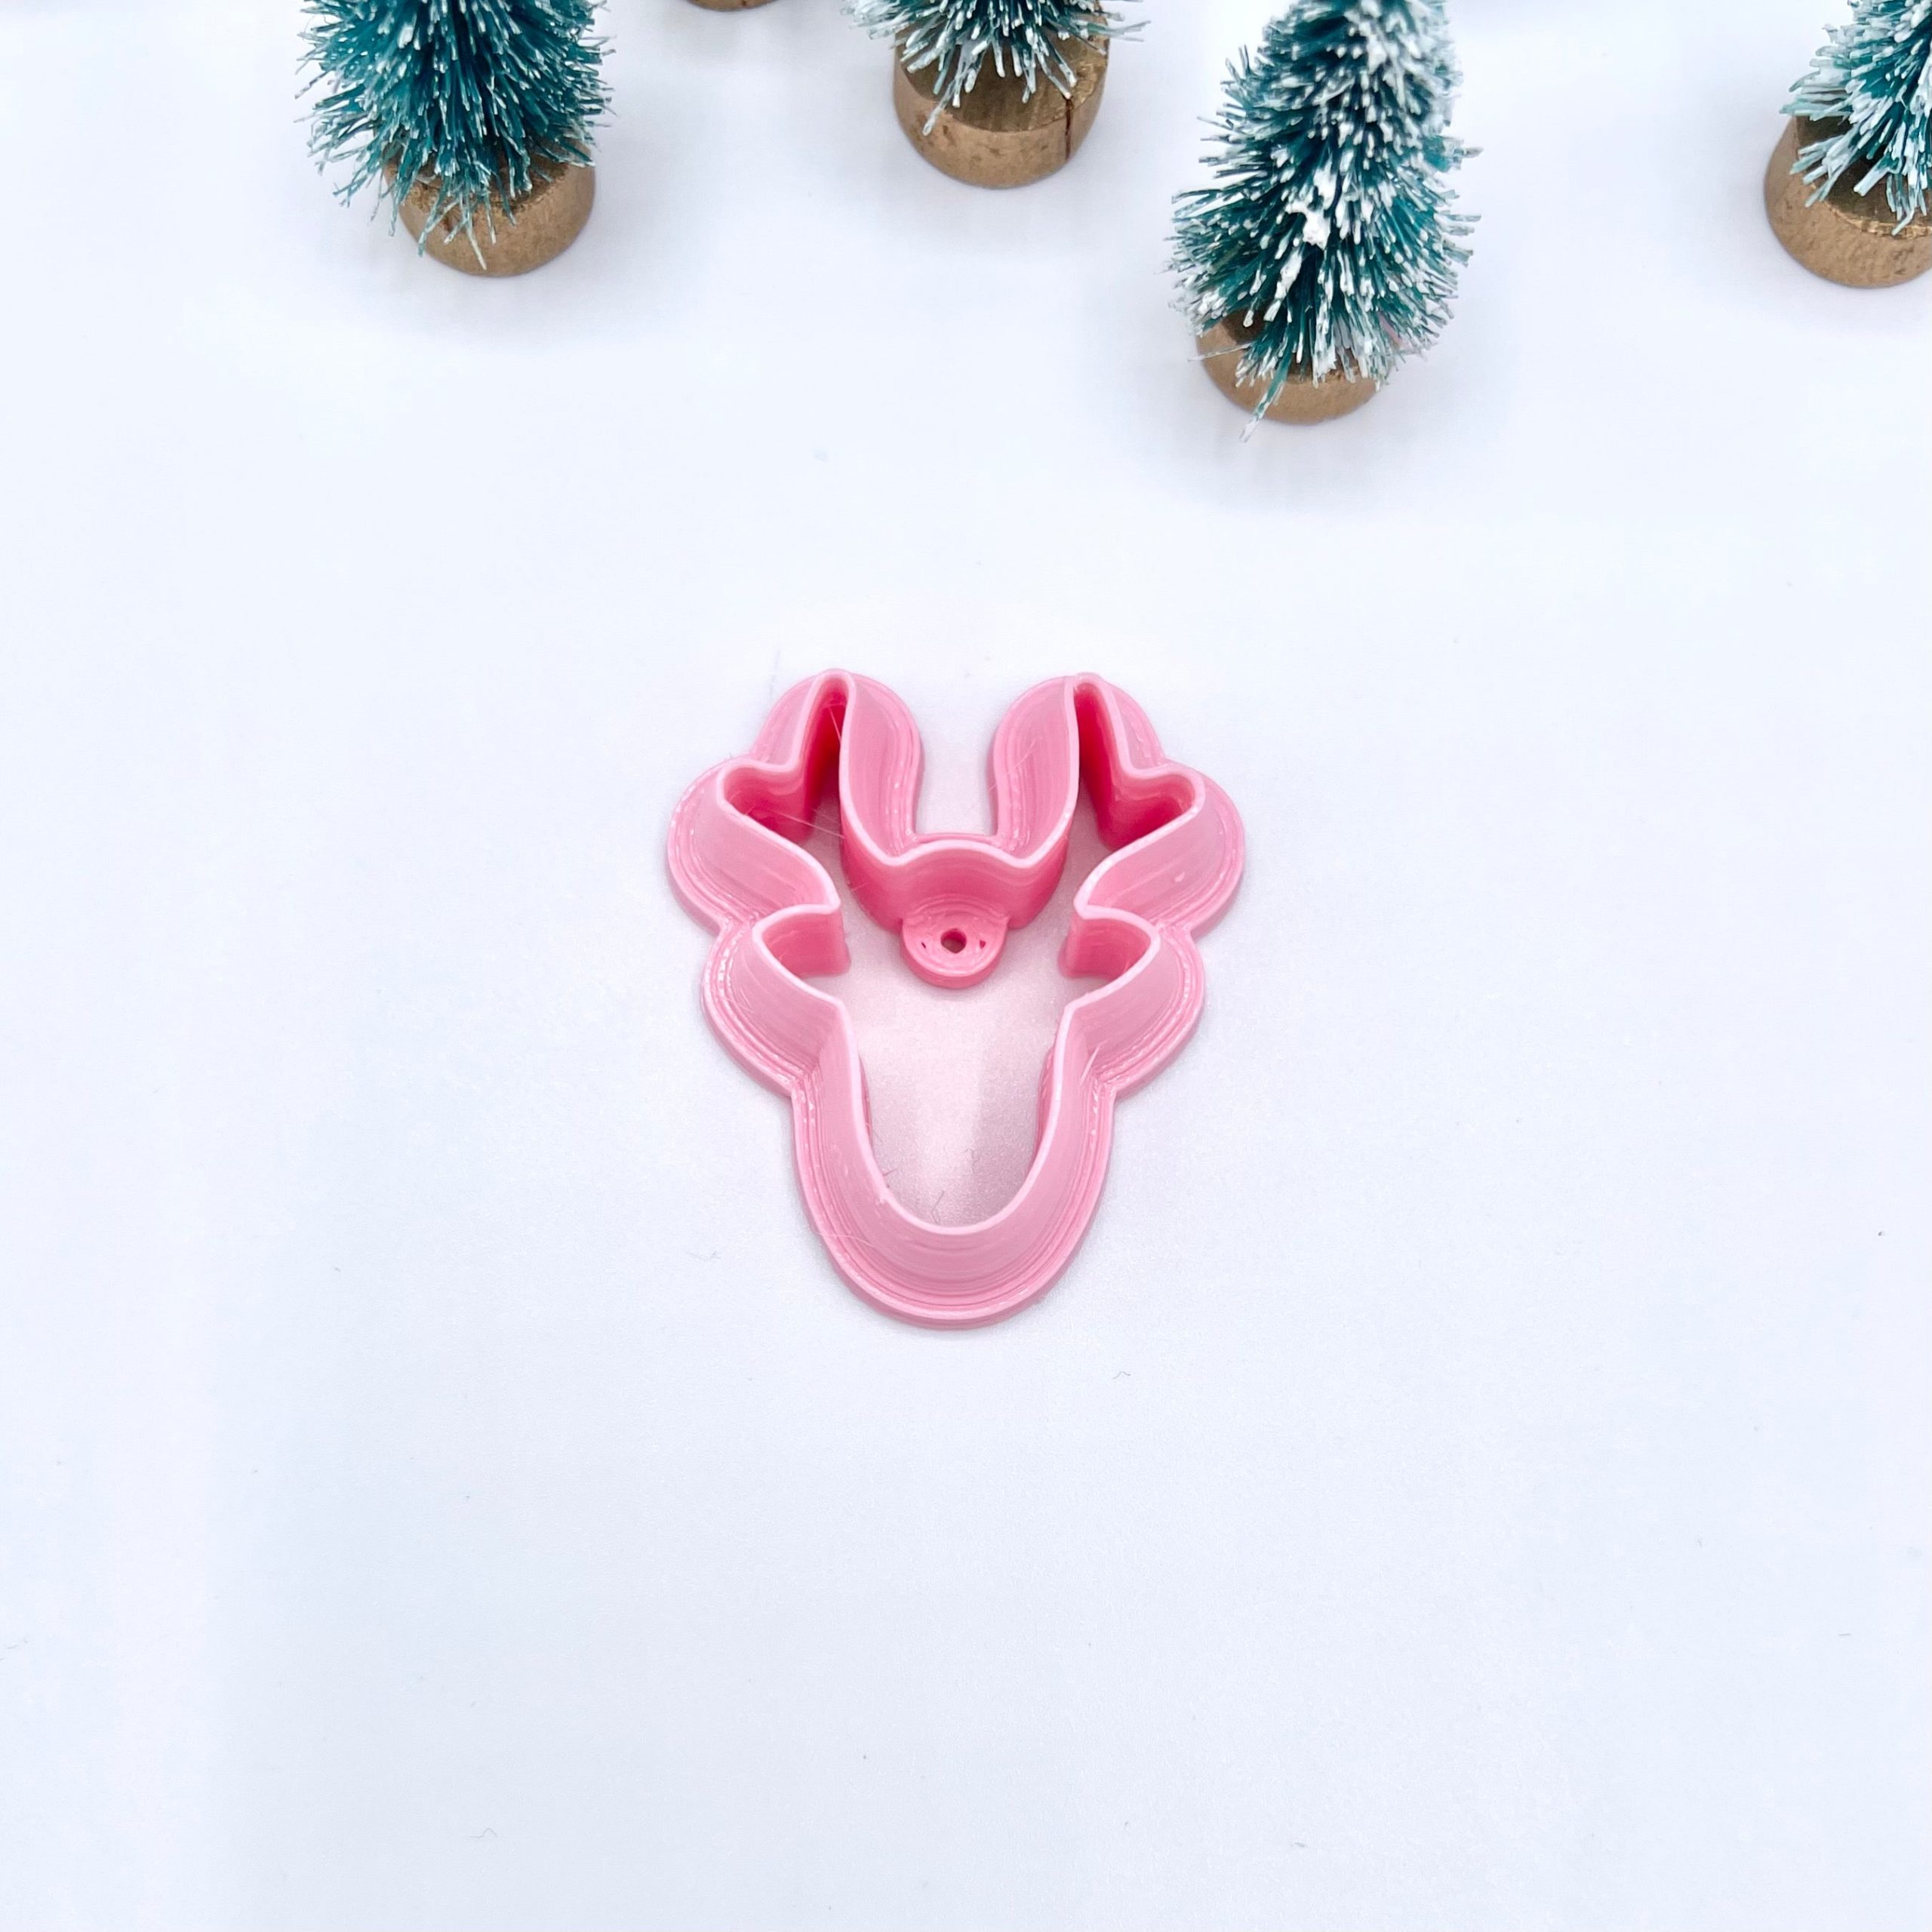 Comet the Reindeer Clay Cutter Cookie Cutter